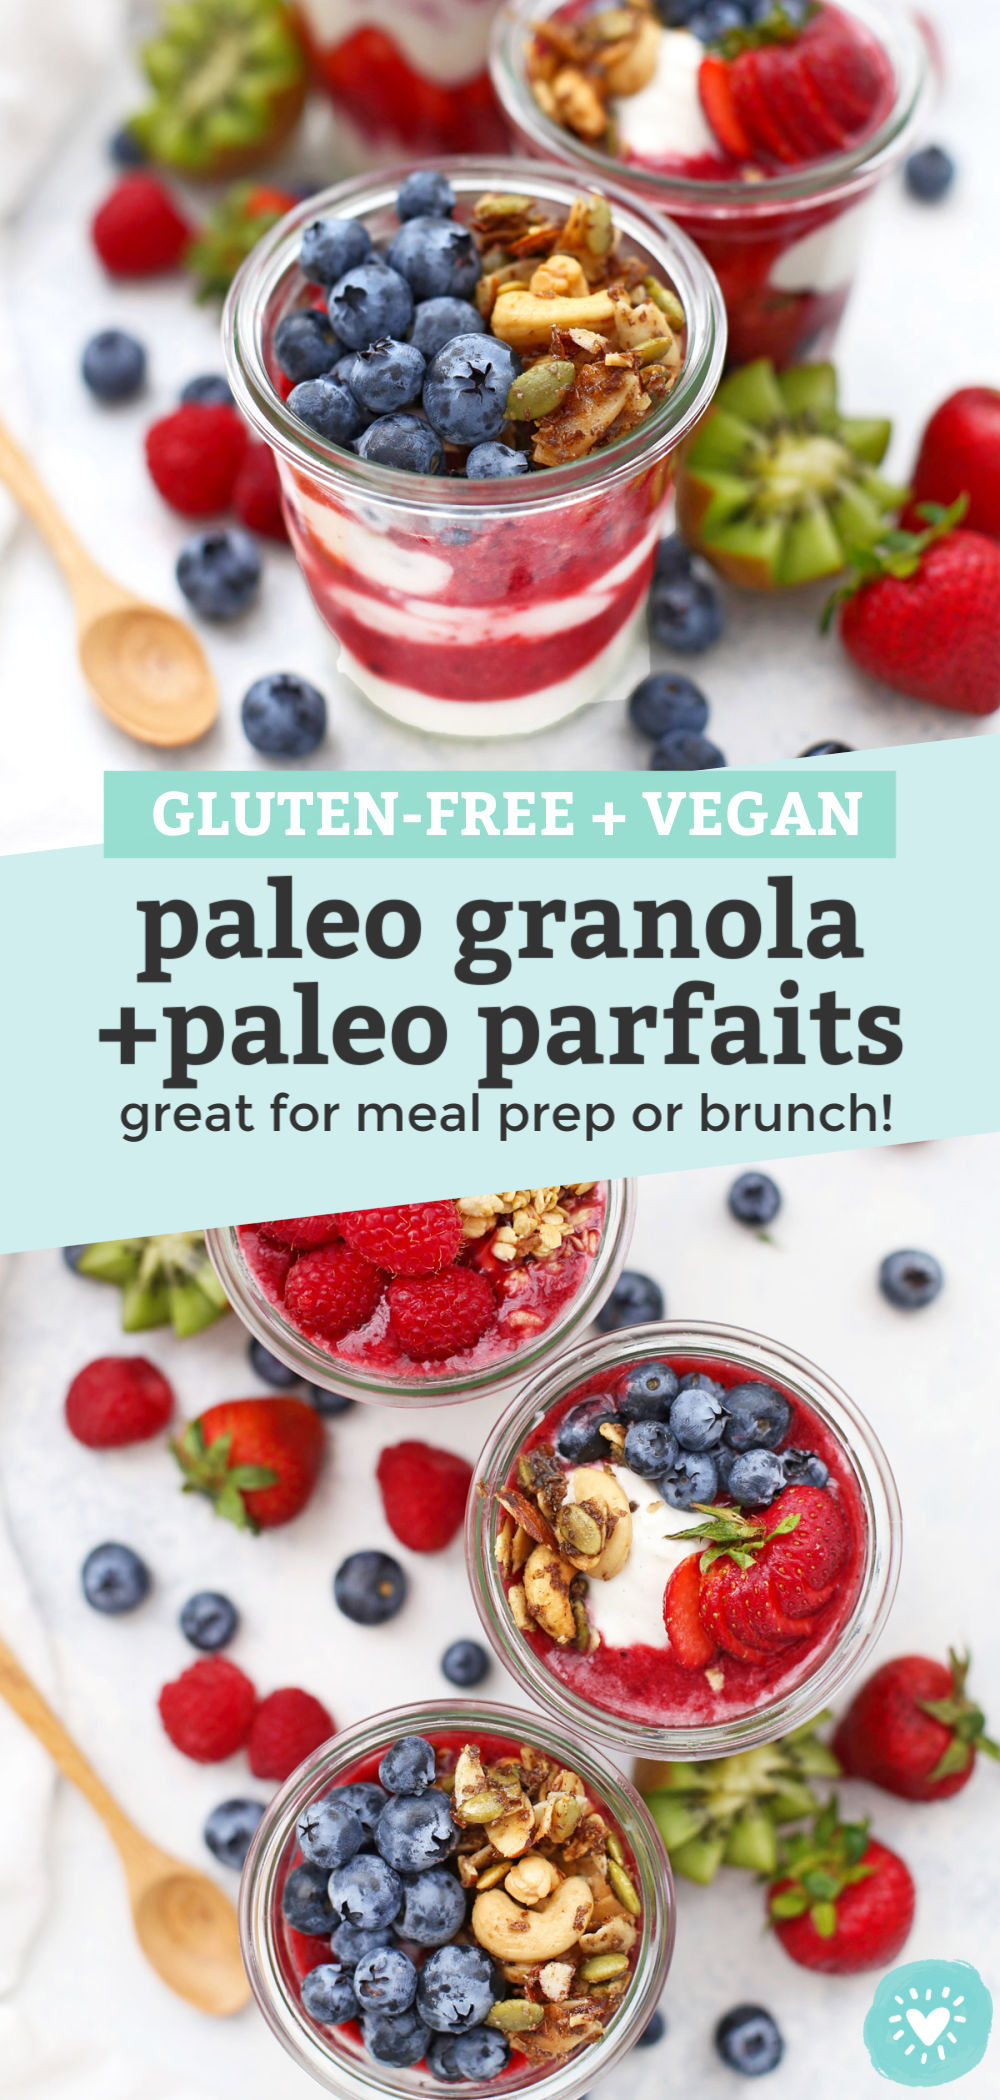 Collage of images of jars of paleo granola parfats with berry puree, fresh fruit, yogurt, and kiwi with text overlay that reads "Gluten-Free + Vegan Paleo Granola + Paleo Parfaits--great for meal prep or brunch!"